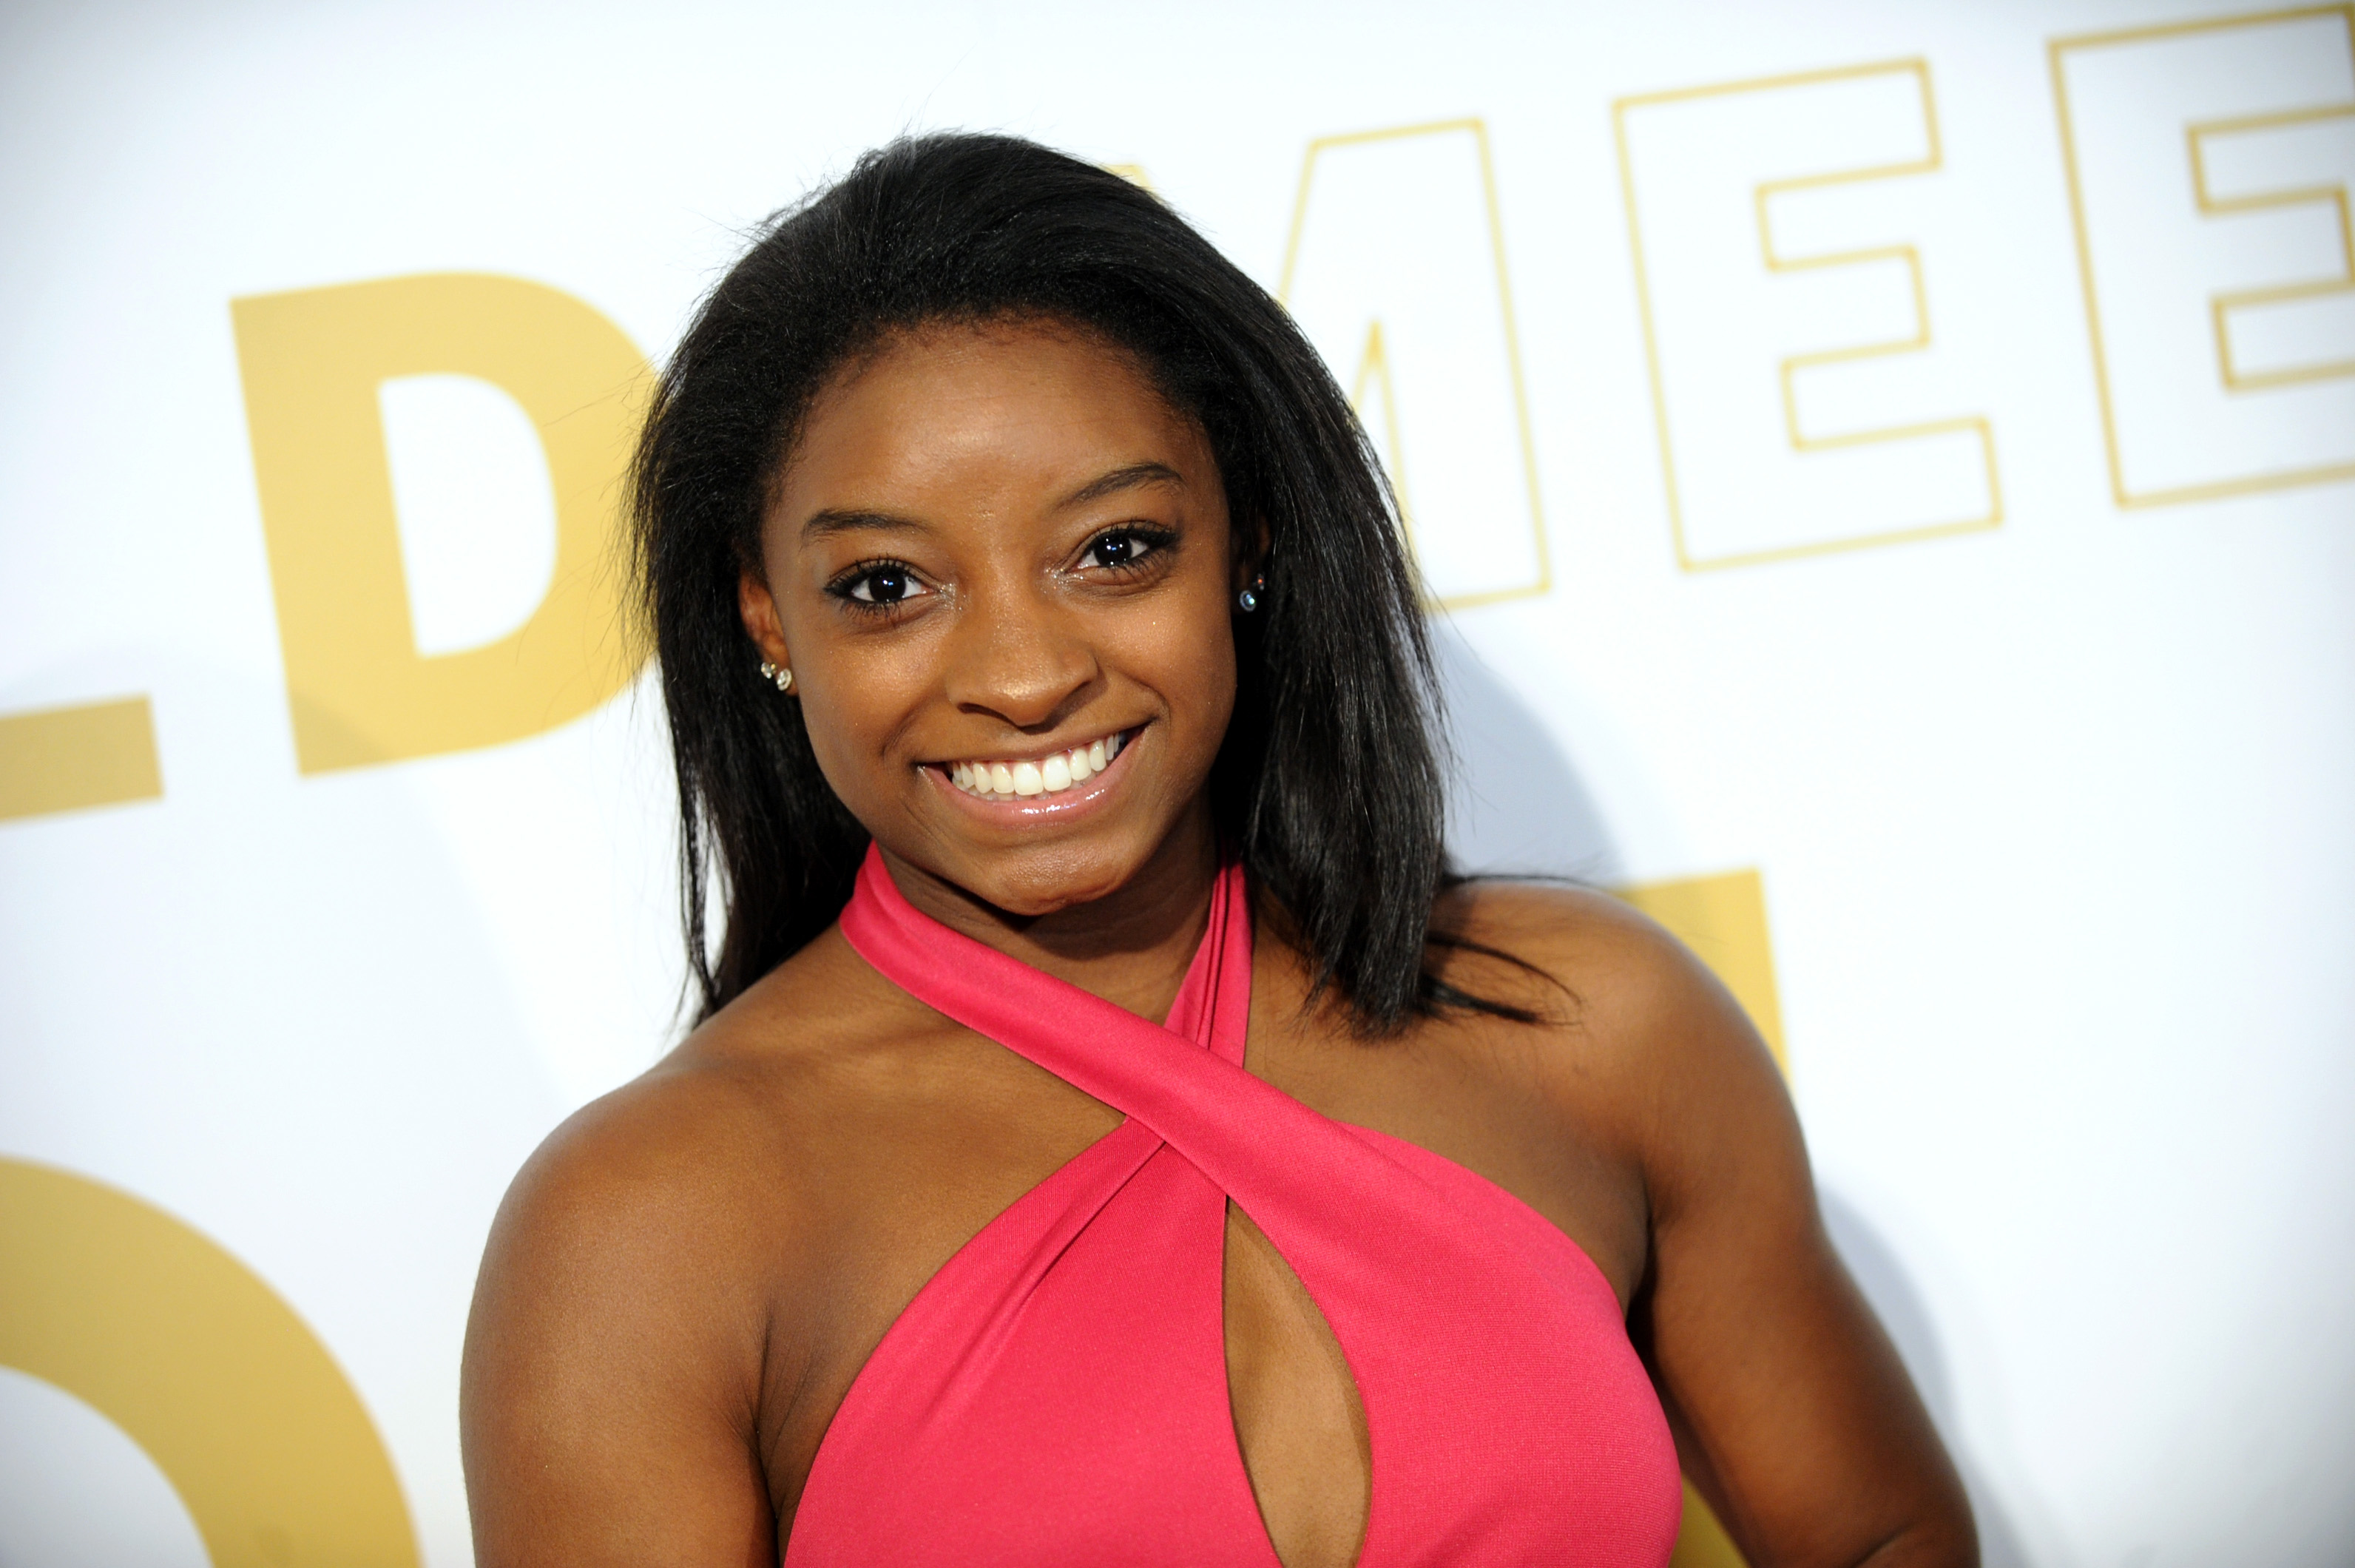 Olympic athlete Simone Biles attends Life is Good at GOLD MEETS GOLDEN Event at Equinox on Jan. 7, 2017 in Los Angeles, Calif. (Emma McIntyre—Getty Images)